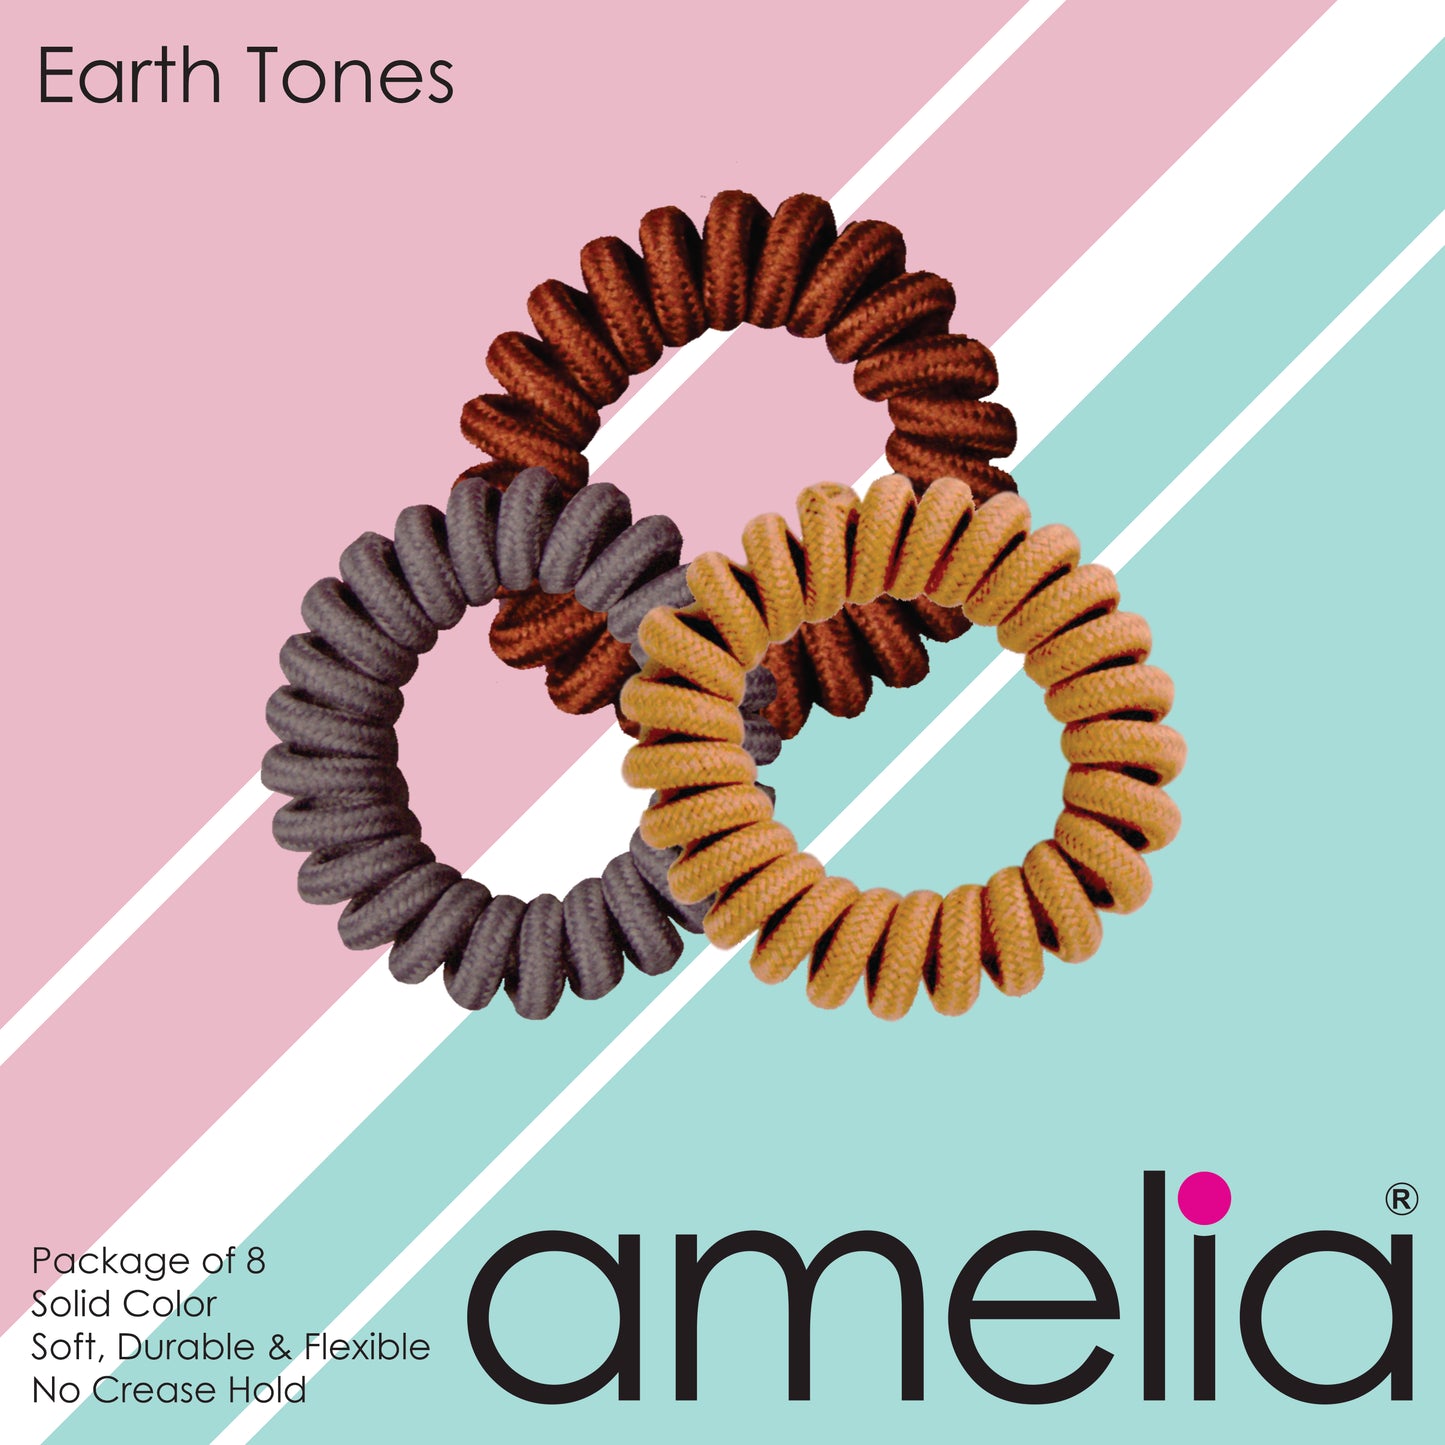 Amelia Beauty, 8 Small Fabric Wrapped Elastic Hair Coils, 1.75in Diameter Spiral Hair Ties, Gentle on Hair, Strong Hold and Minimizes Dents and Creases, Earth Tones